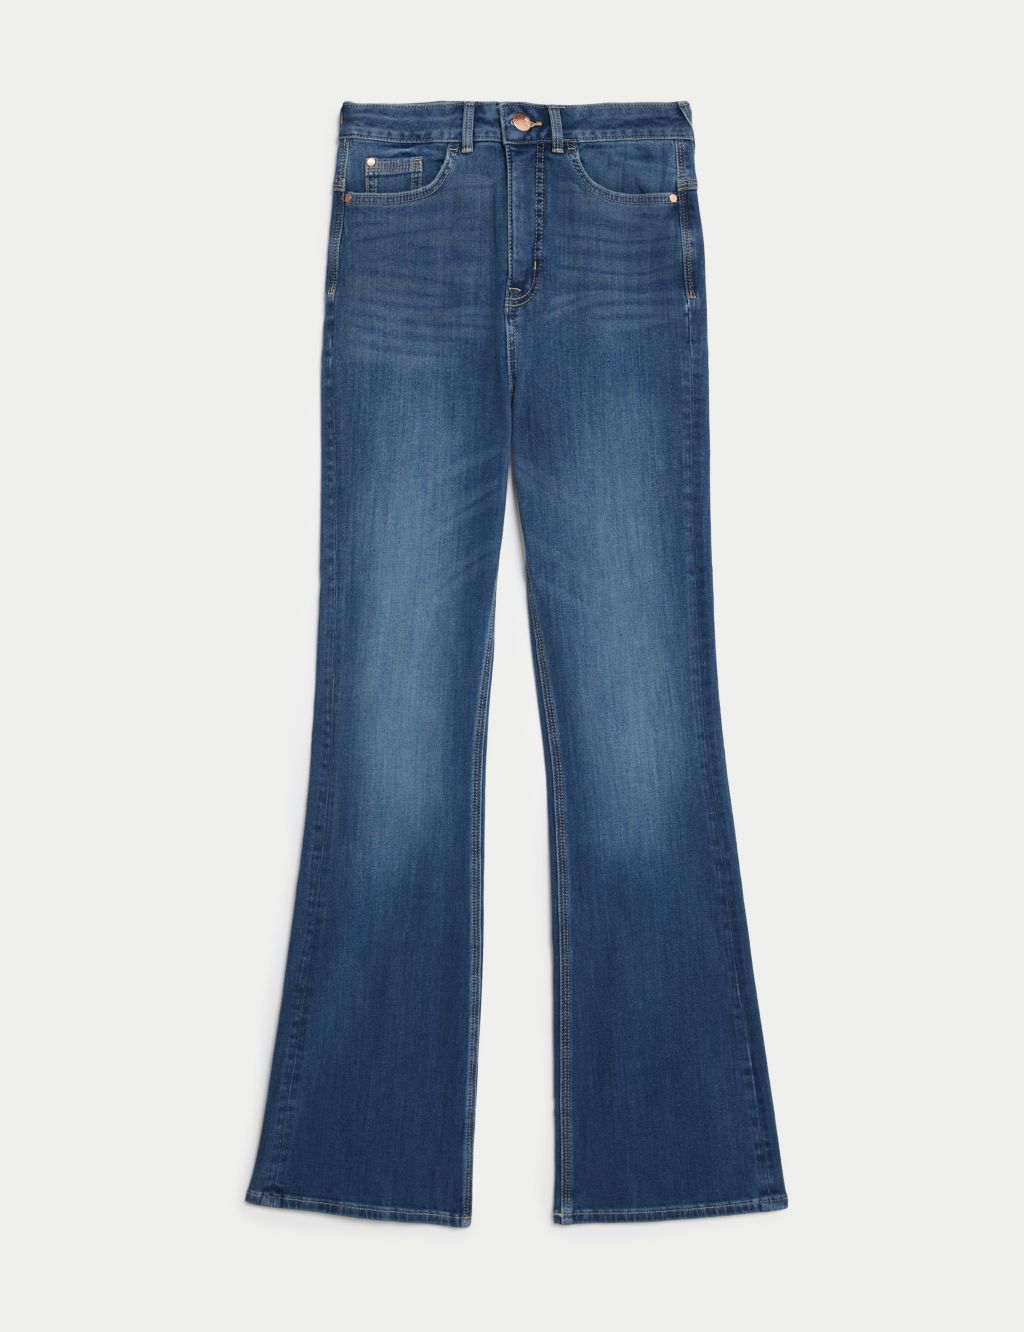 Magic Shaping High Waisted Slim Flare Jeans image 2